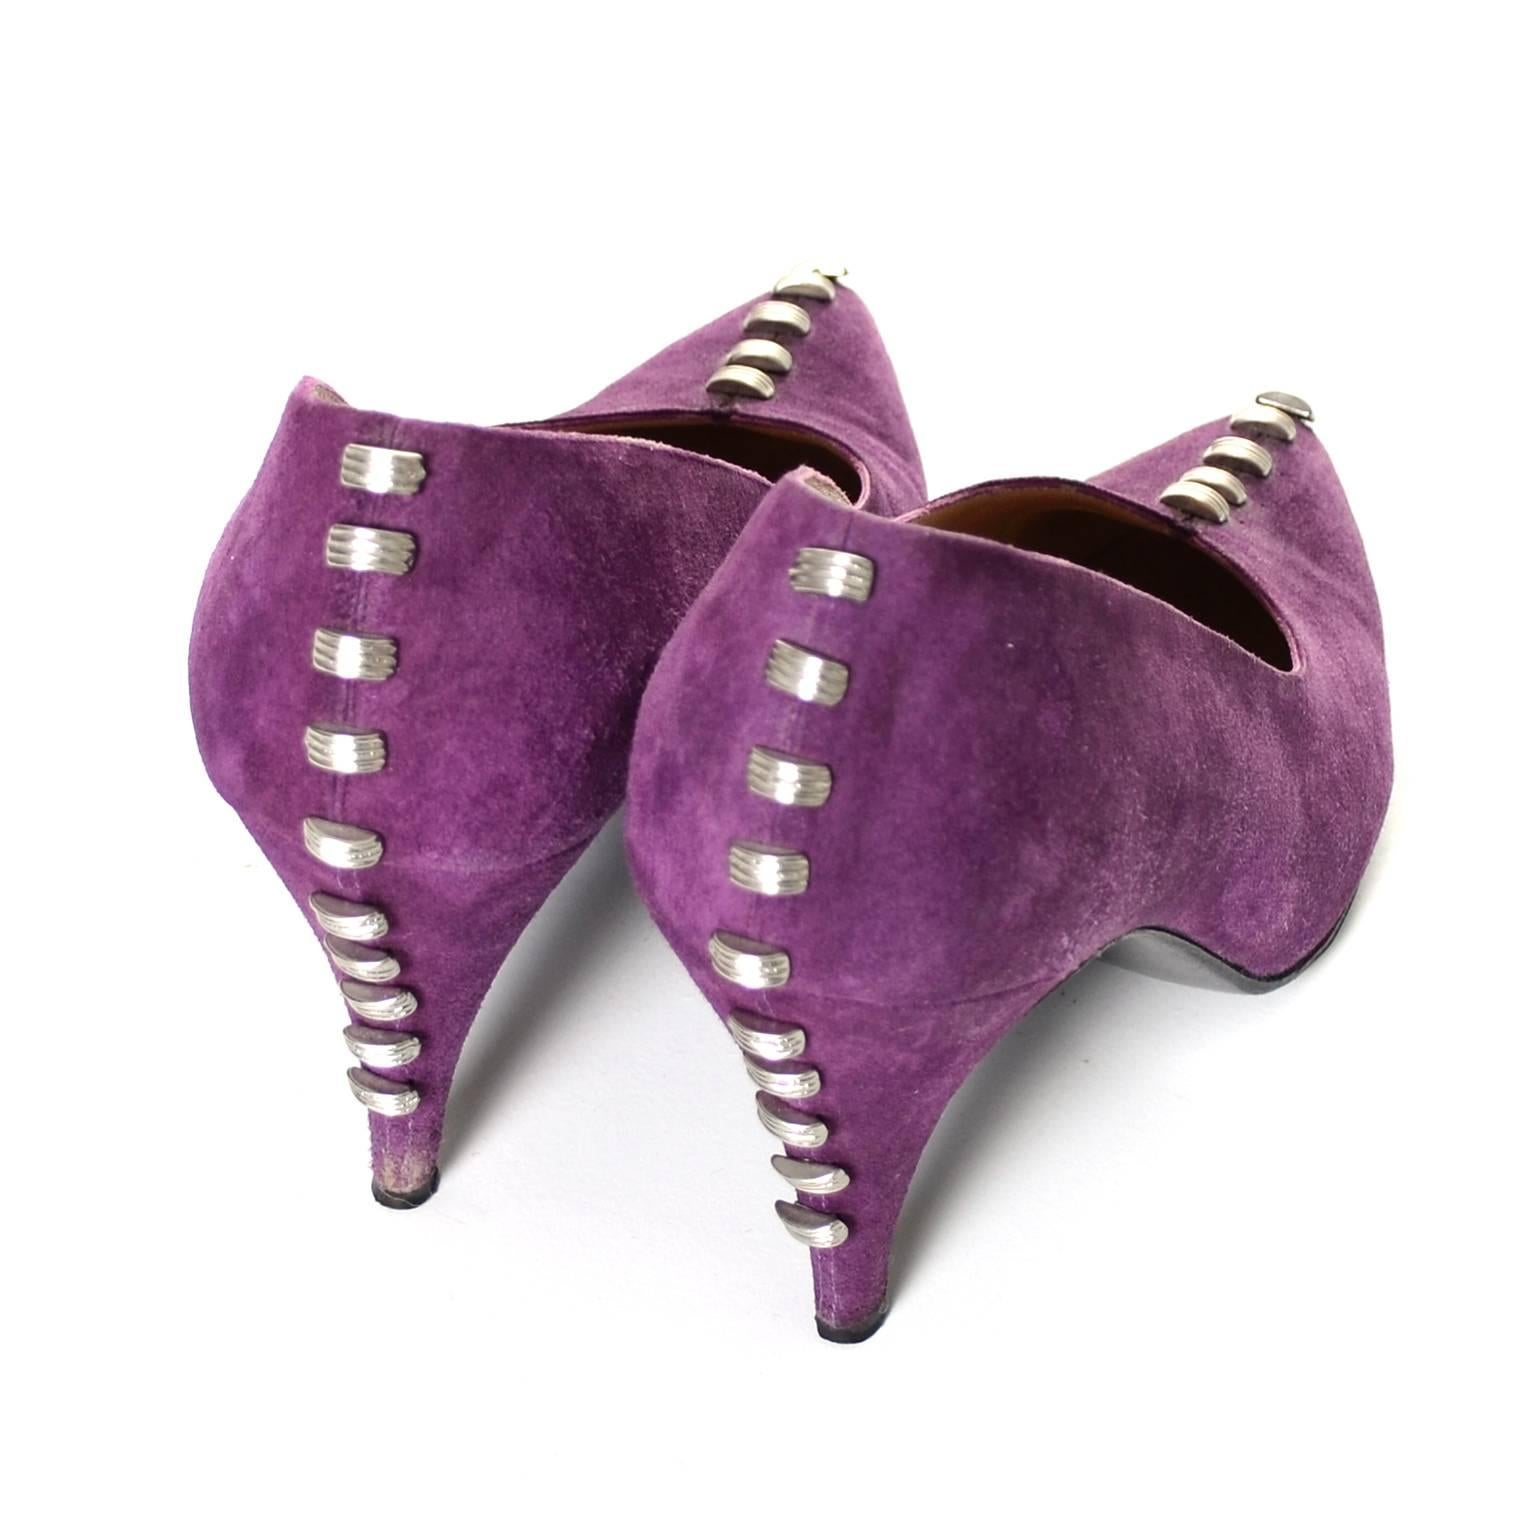 These vintage Maud Frizon purple suede shoes have great silver studs on the heels and the toes.  The shoes have only sole scuffs to show any wear and were made in Italy in the 1980's.  These fab shoes have 4